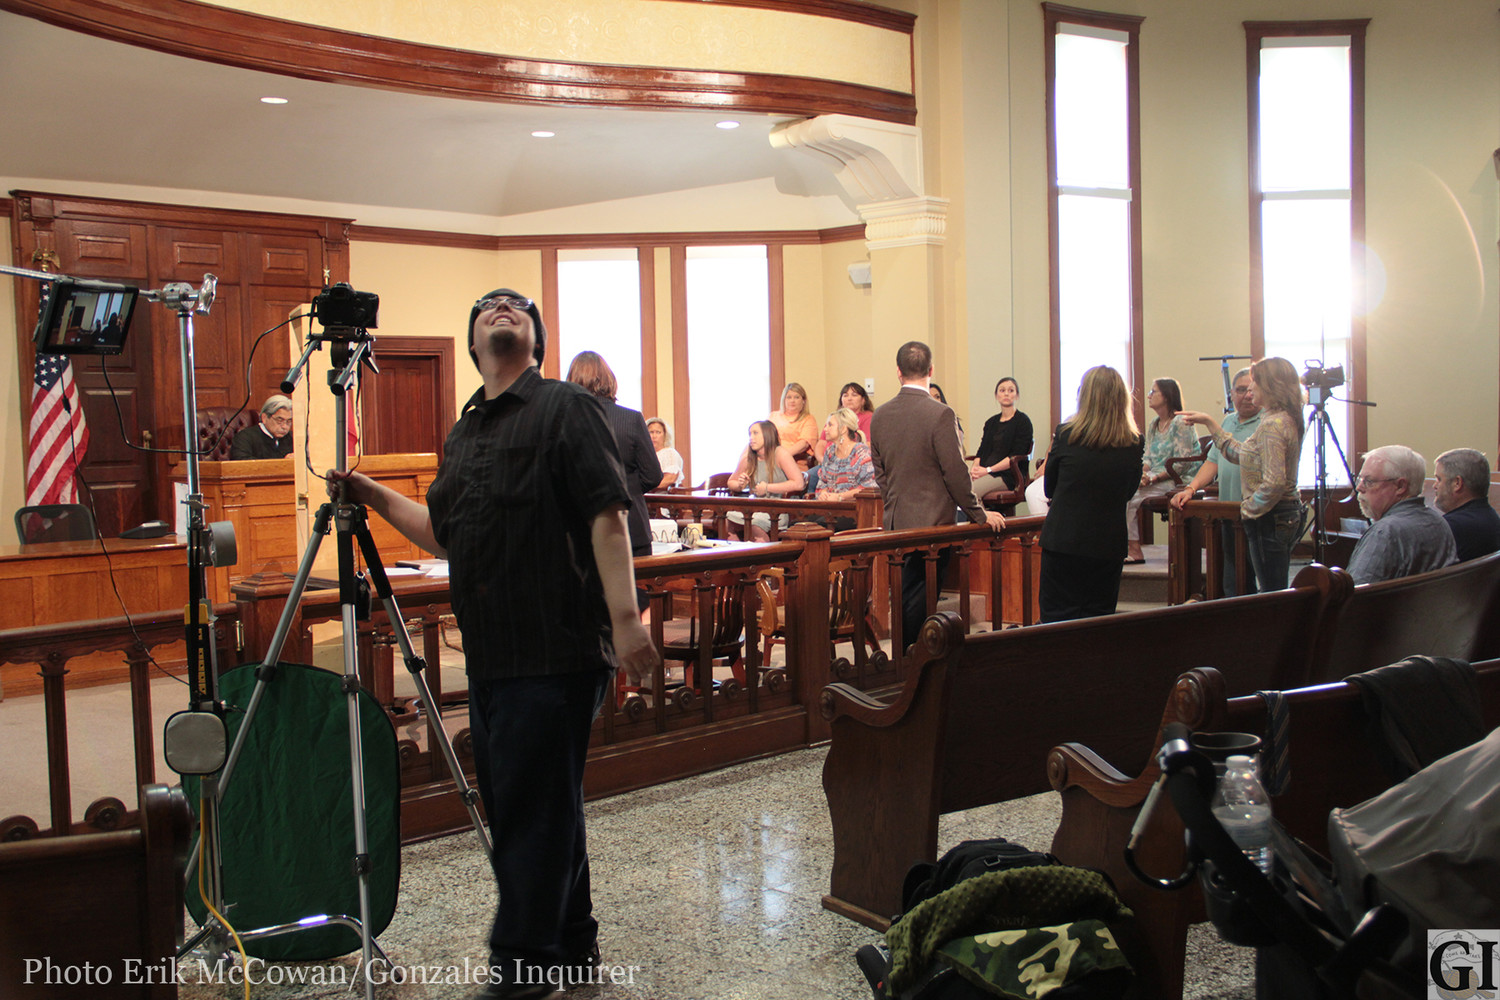 The district courtroom at the Gonzales County courthouse was the scene for a short film shoot earlier this month. The story comes from the Bettie and Ruben Ramirez child abuse and murder trial that occurred in the same room in 2009.